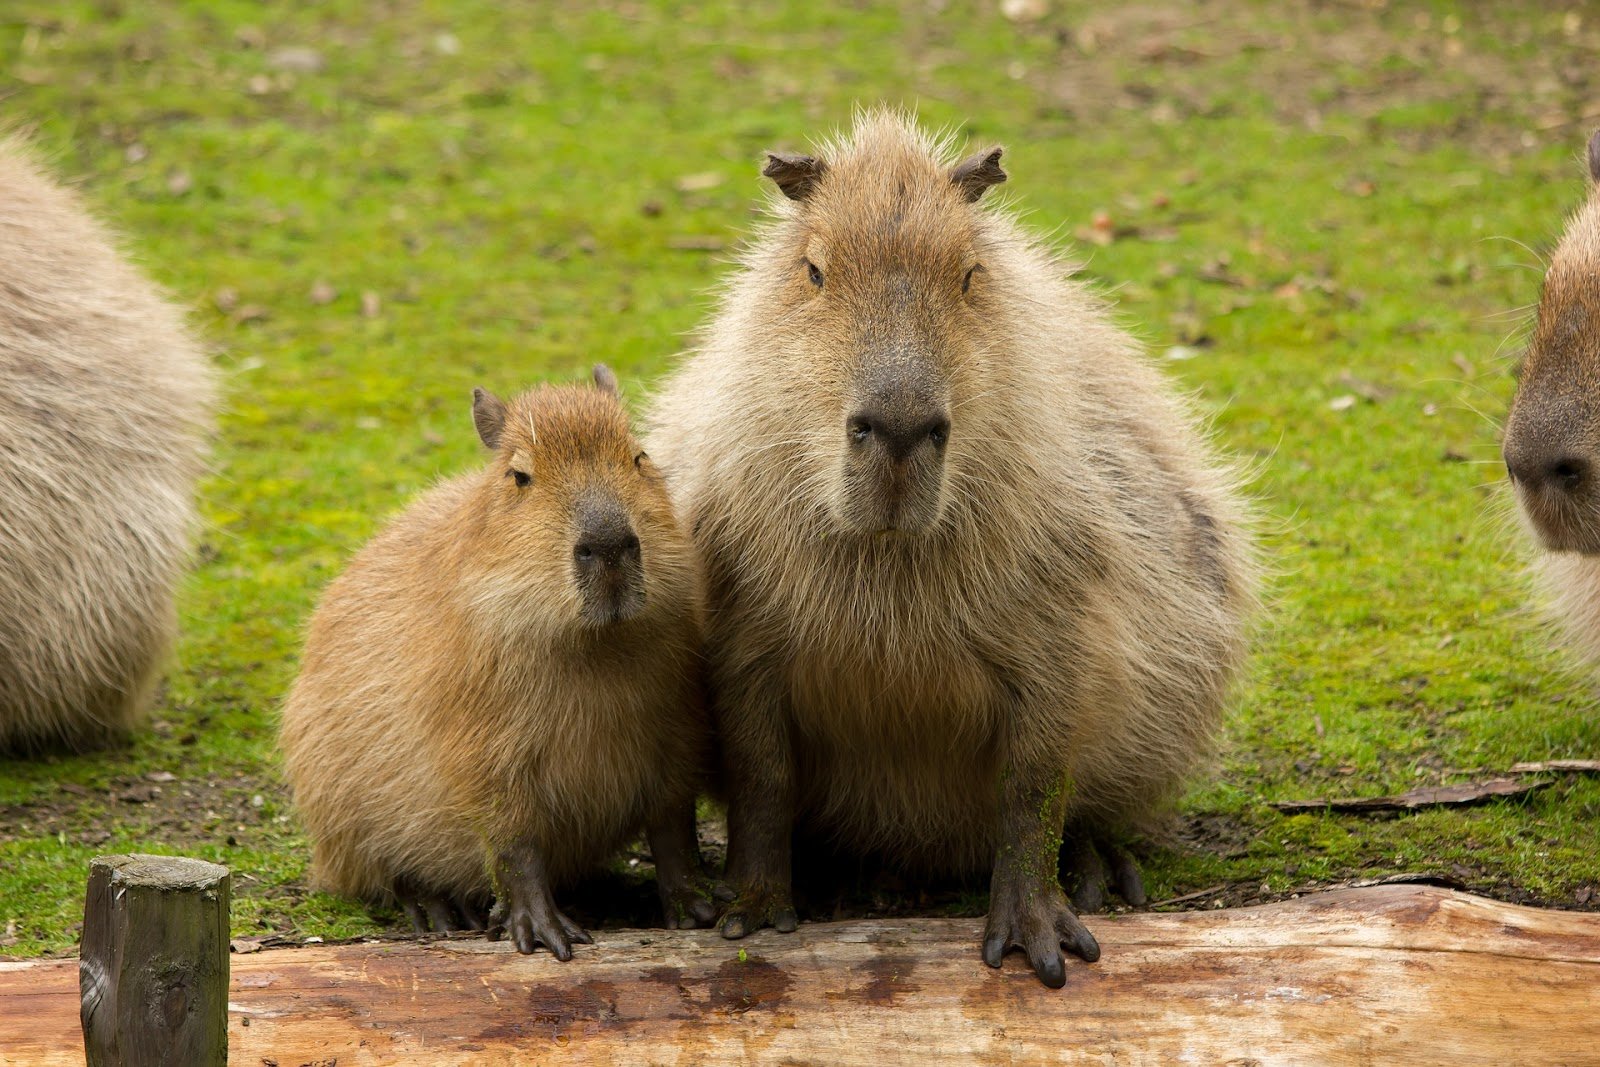 The Growth of Capybaras